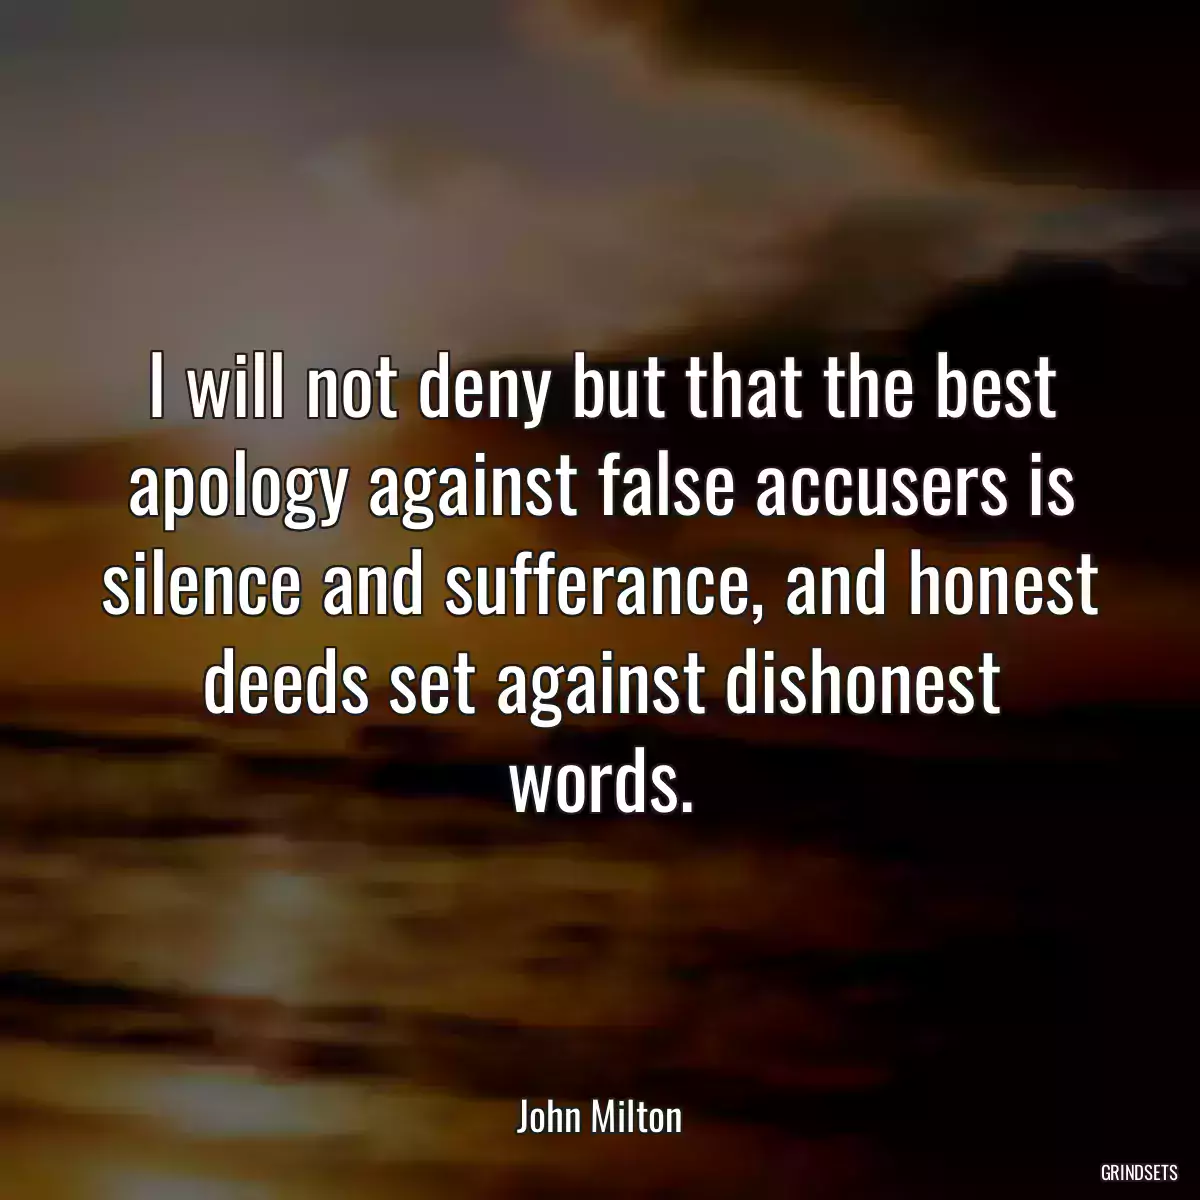 I will not deny but that the best apology against false accusers is silence and sufferance, and honest deeds set against dishonest words.